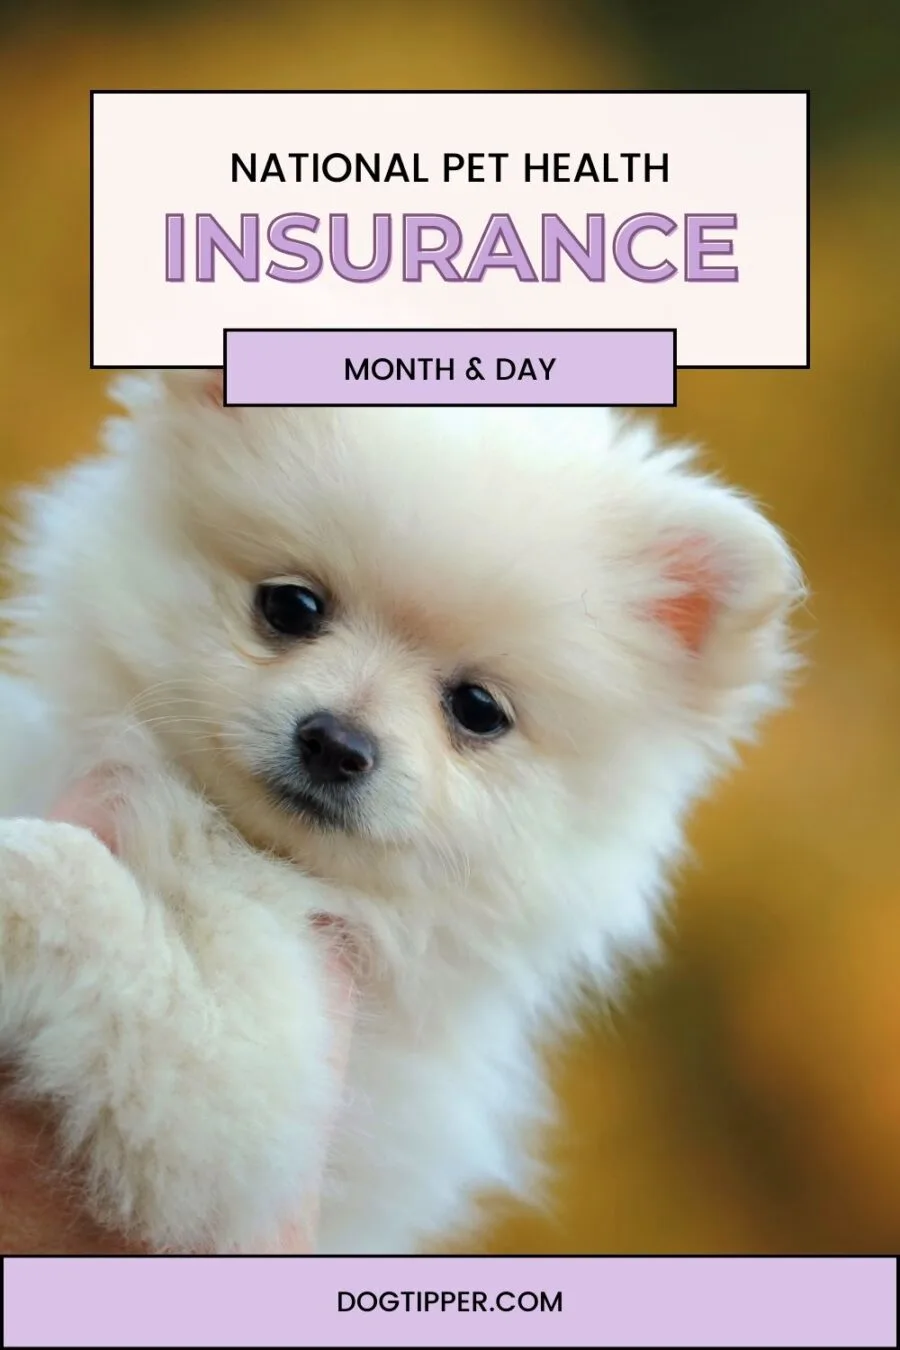 National Pet Insurance Month & Day -- questions to consider if you are thinking about pet insurance